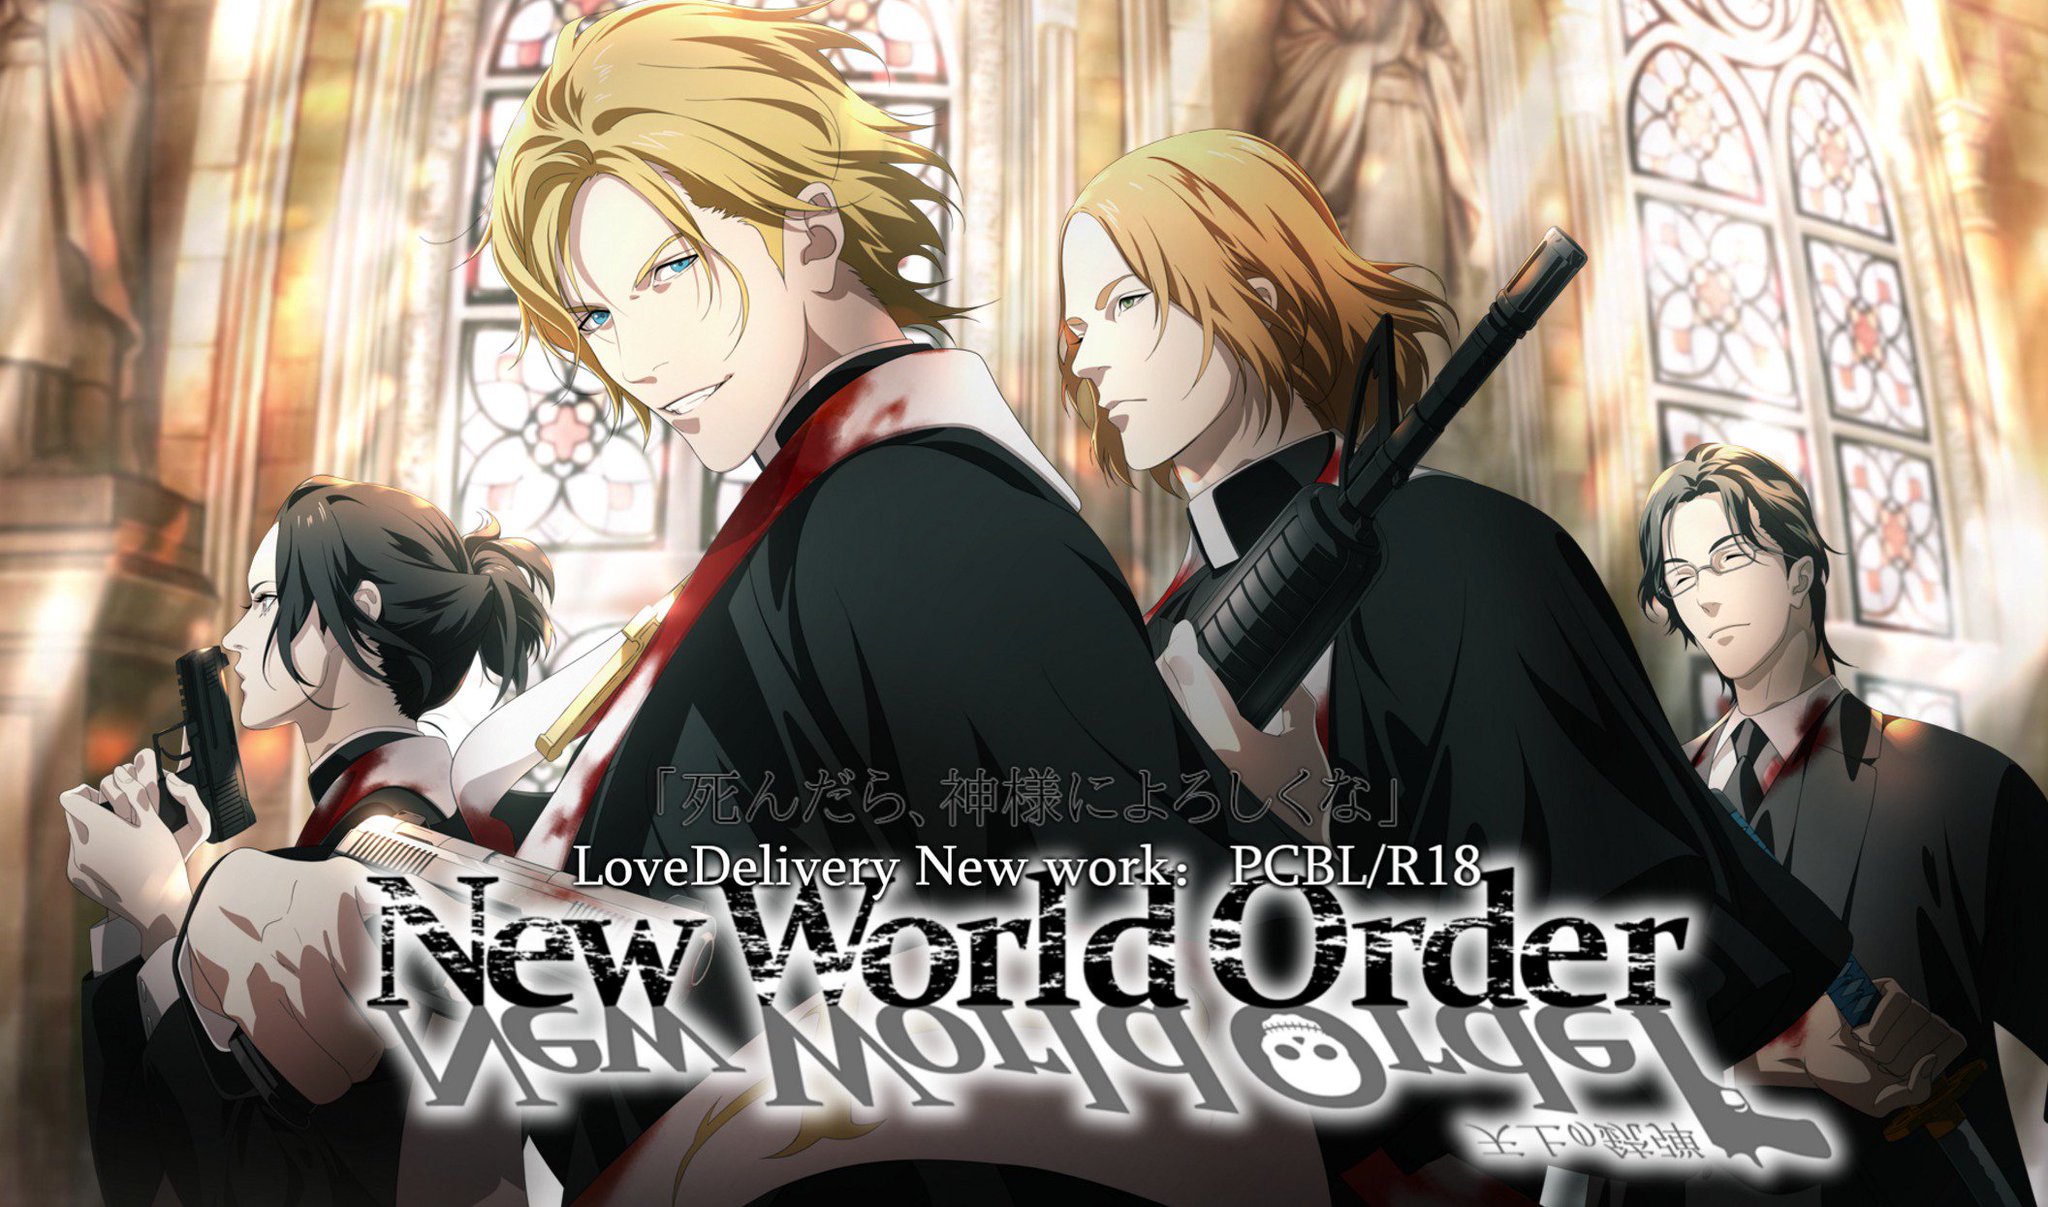 Anime World Order PodcastAmazoncomAppstore for Android